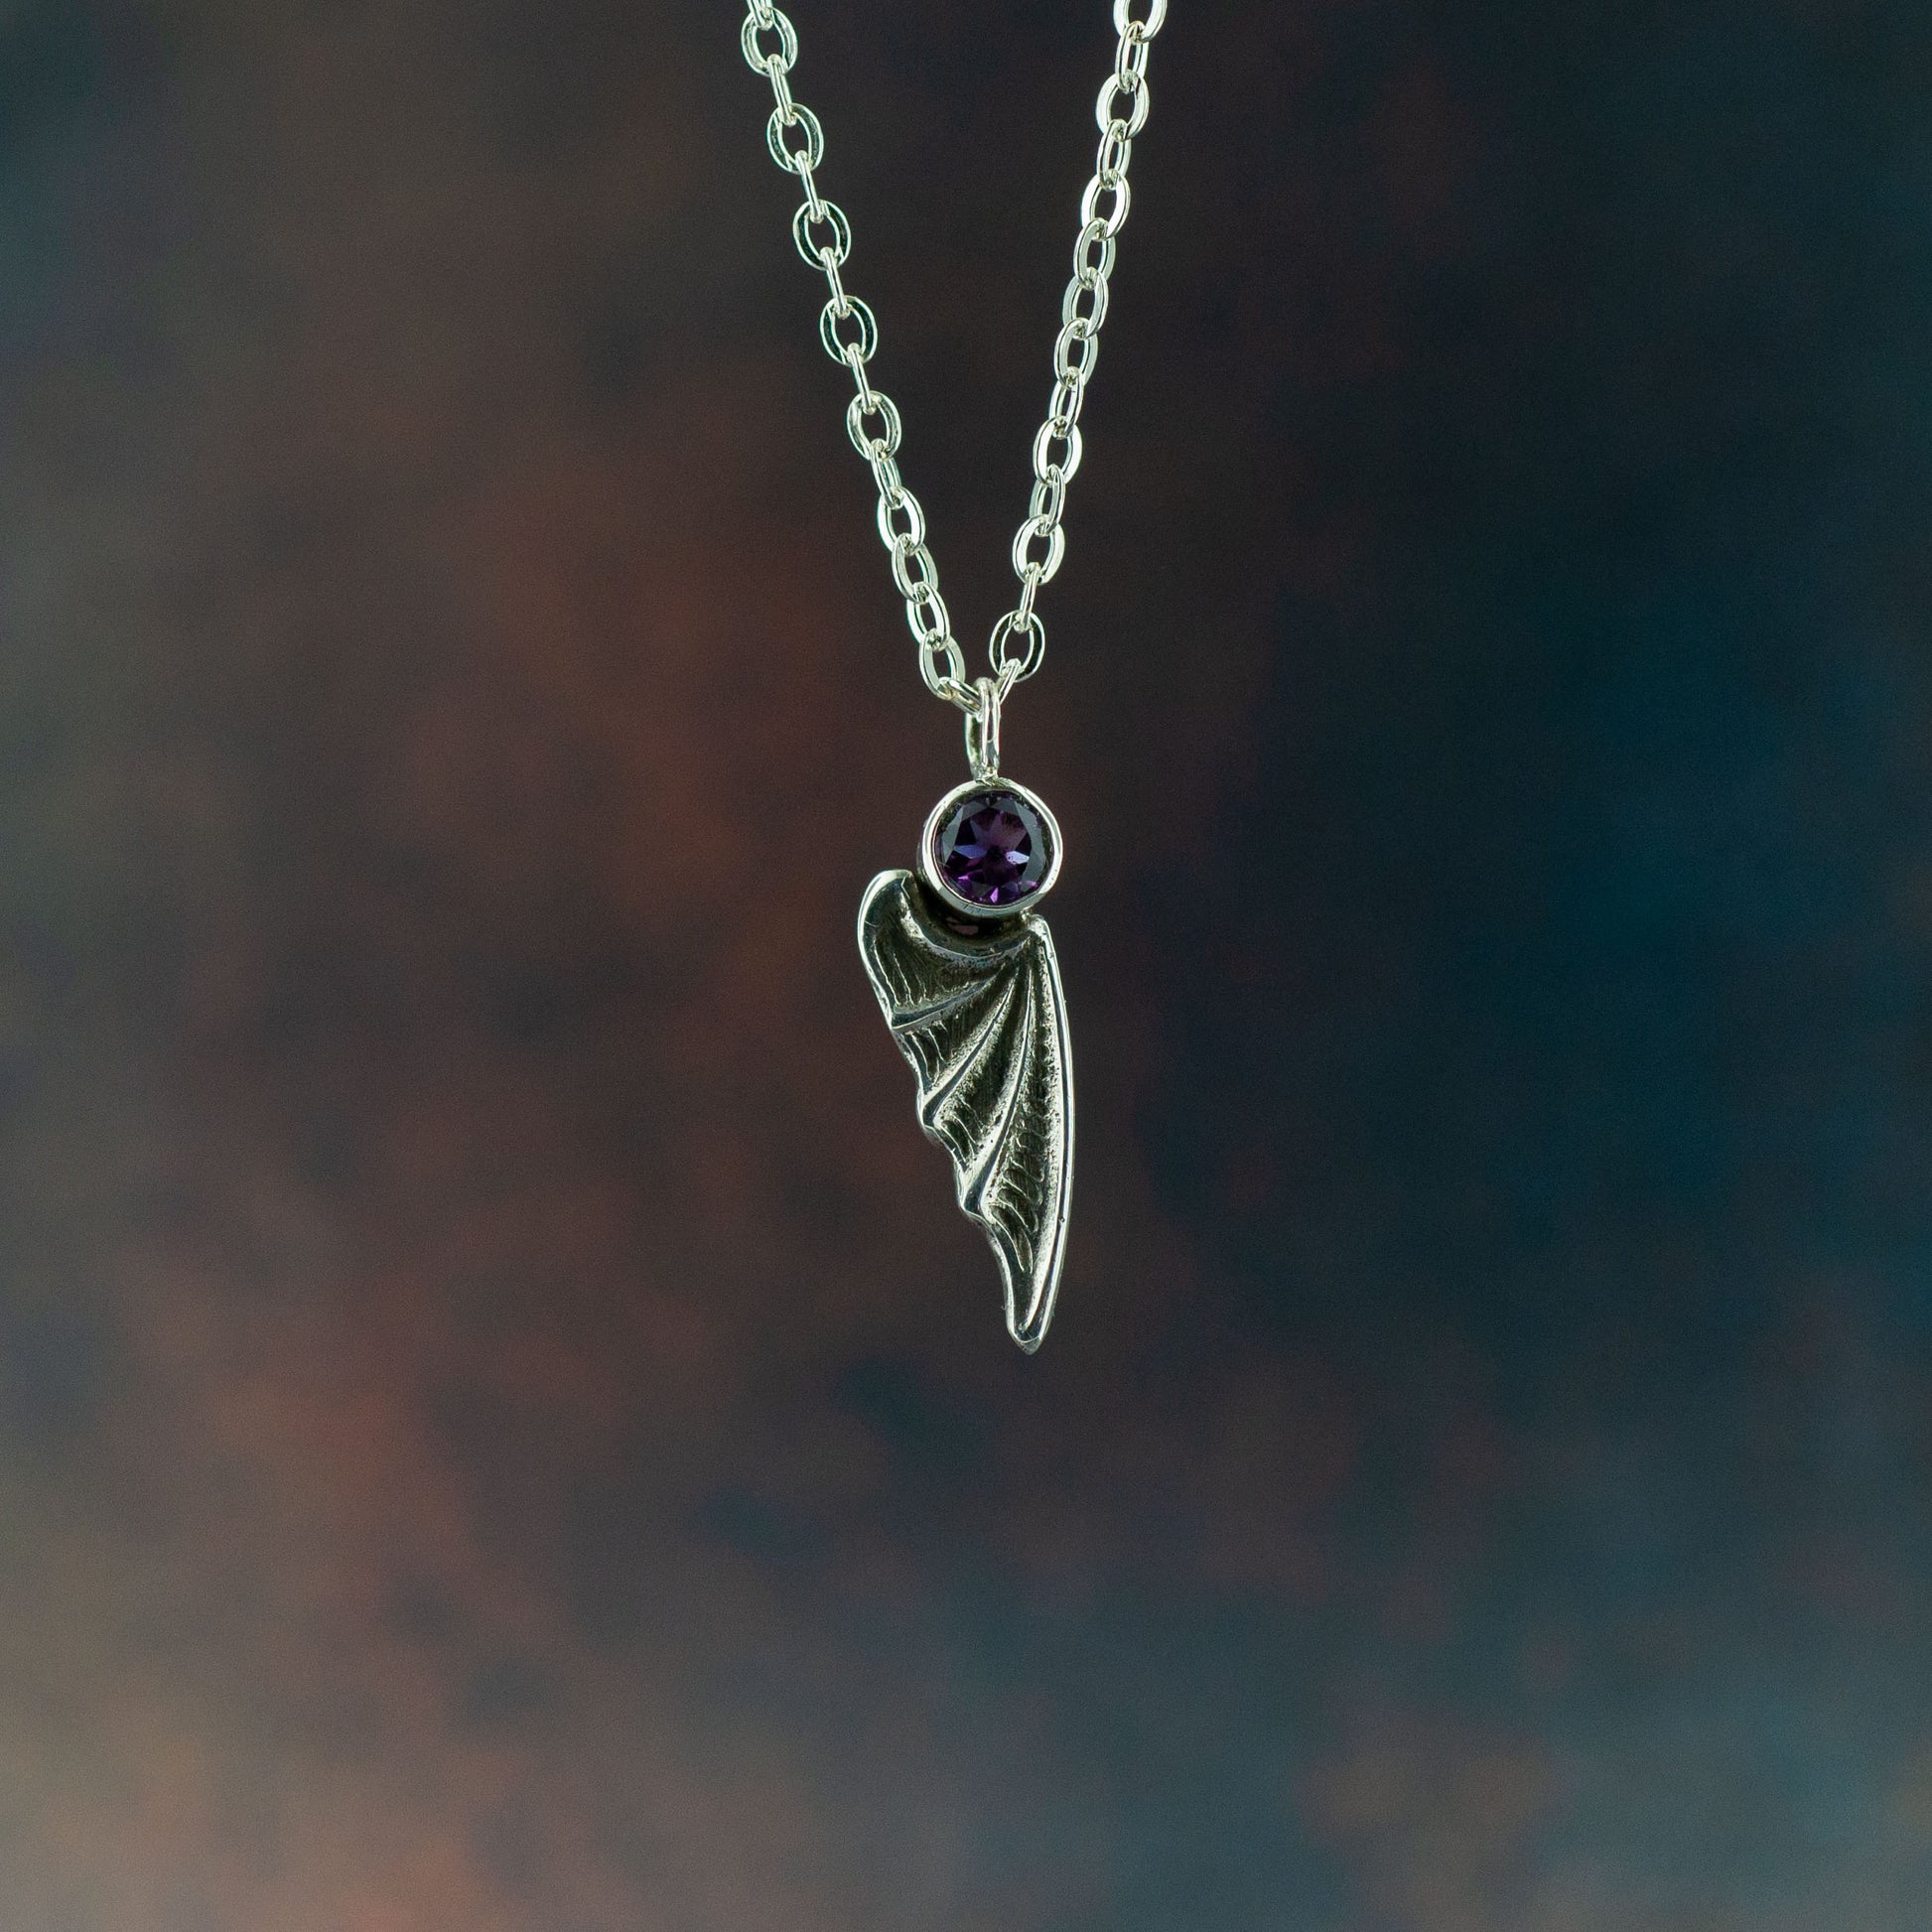 illyrian wing necklace